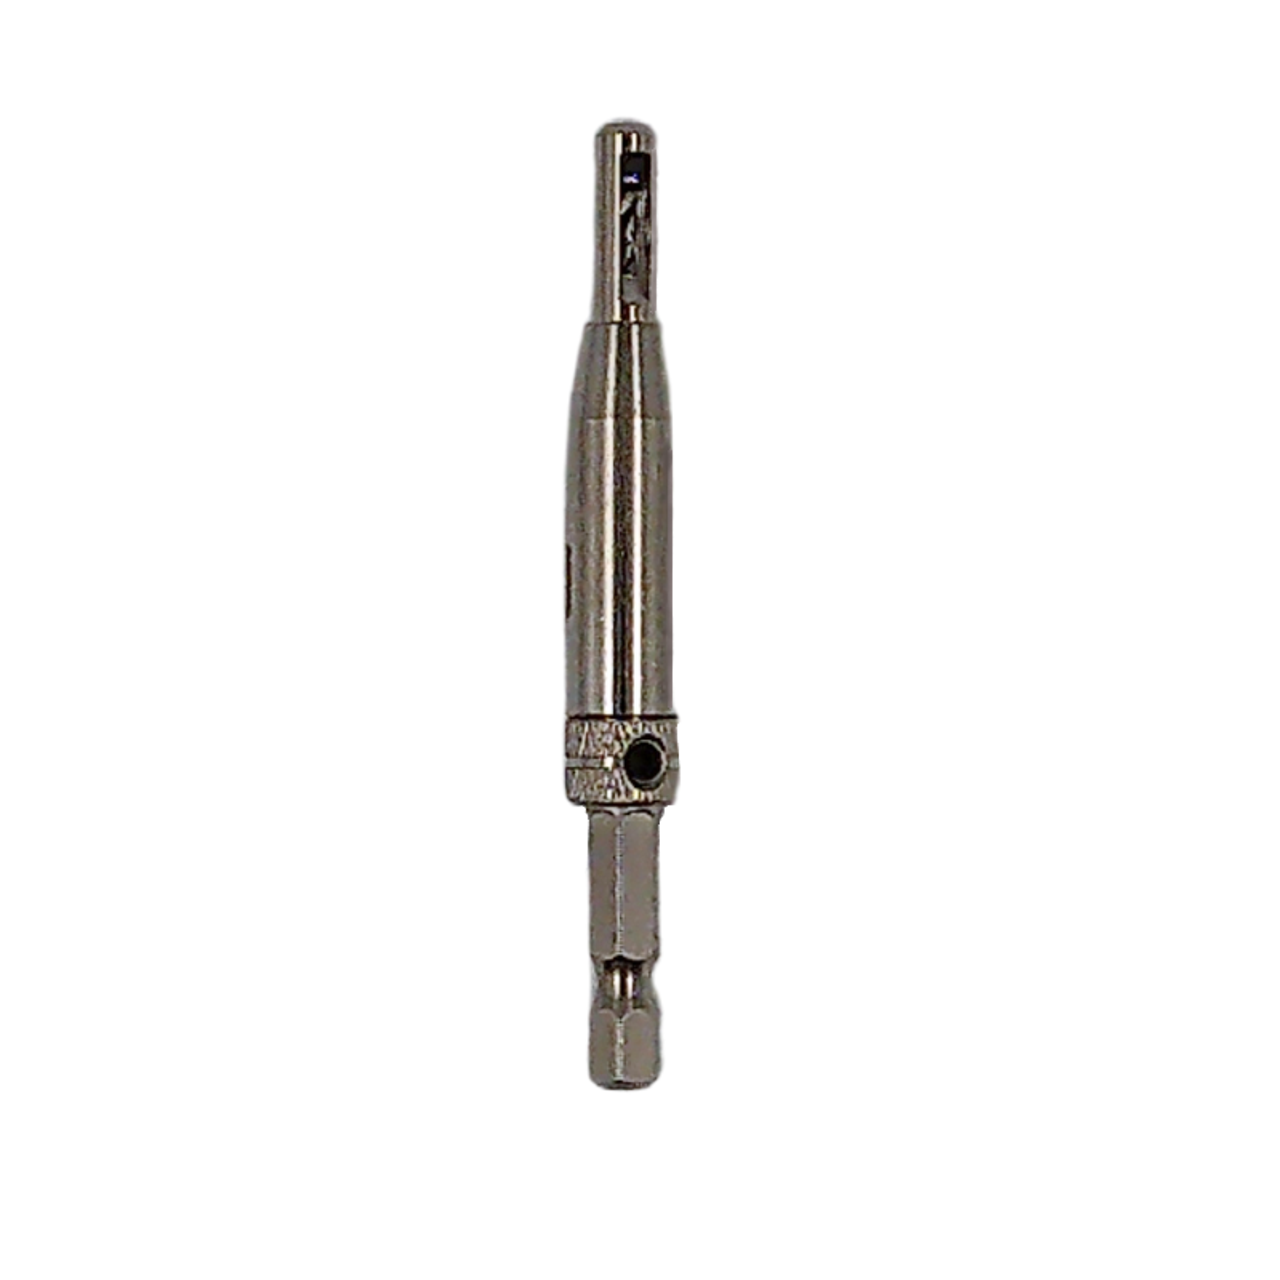 FAMAG Centring Drill Bit | 3582 Self Centring Hinge Drill Bit  for 3.5mm Drill, Fine Woodworking, Cabinetry, Woodwork Supplies, Trade Supplies and Carpentry